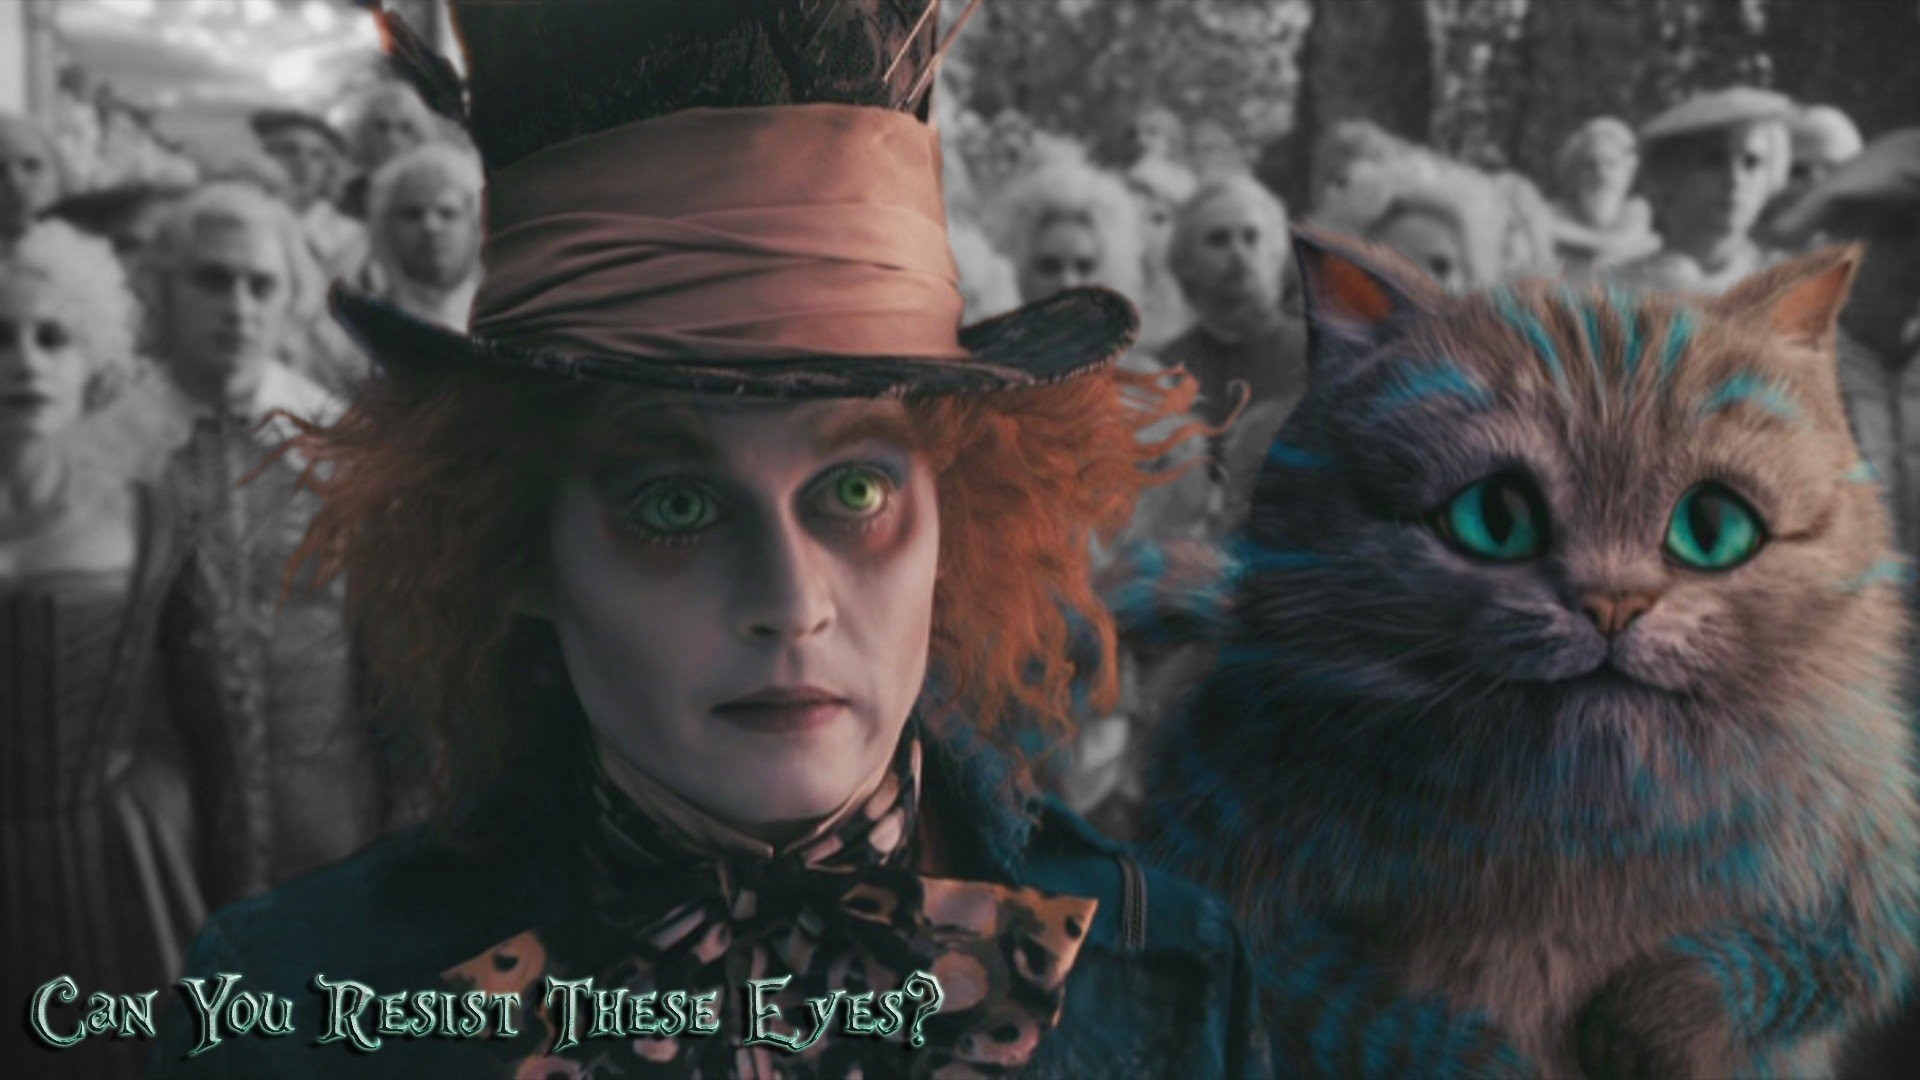 1920x1080 PreviousNext. Previous Image Next Image. movies alice in wonderland mad  hatter johnny depp ...